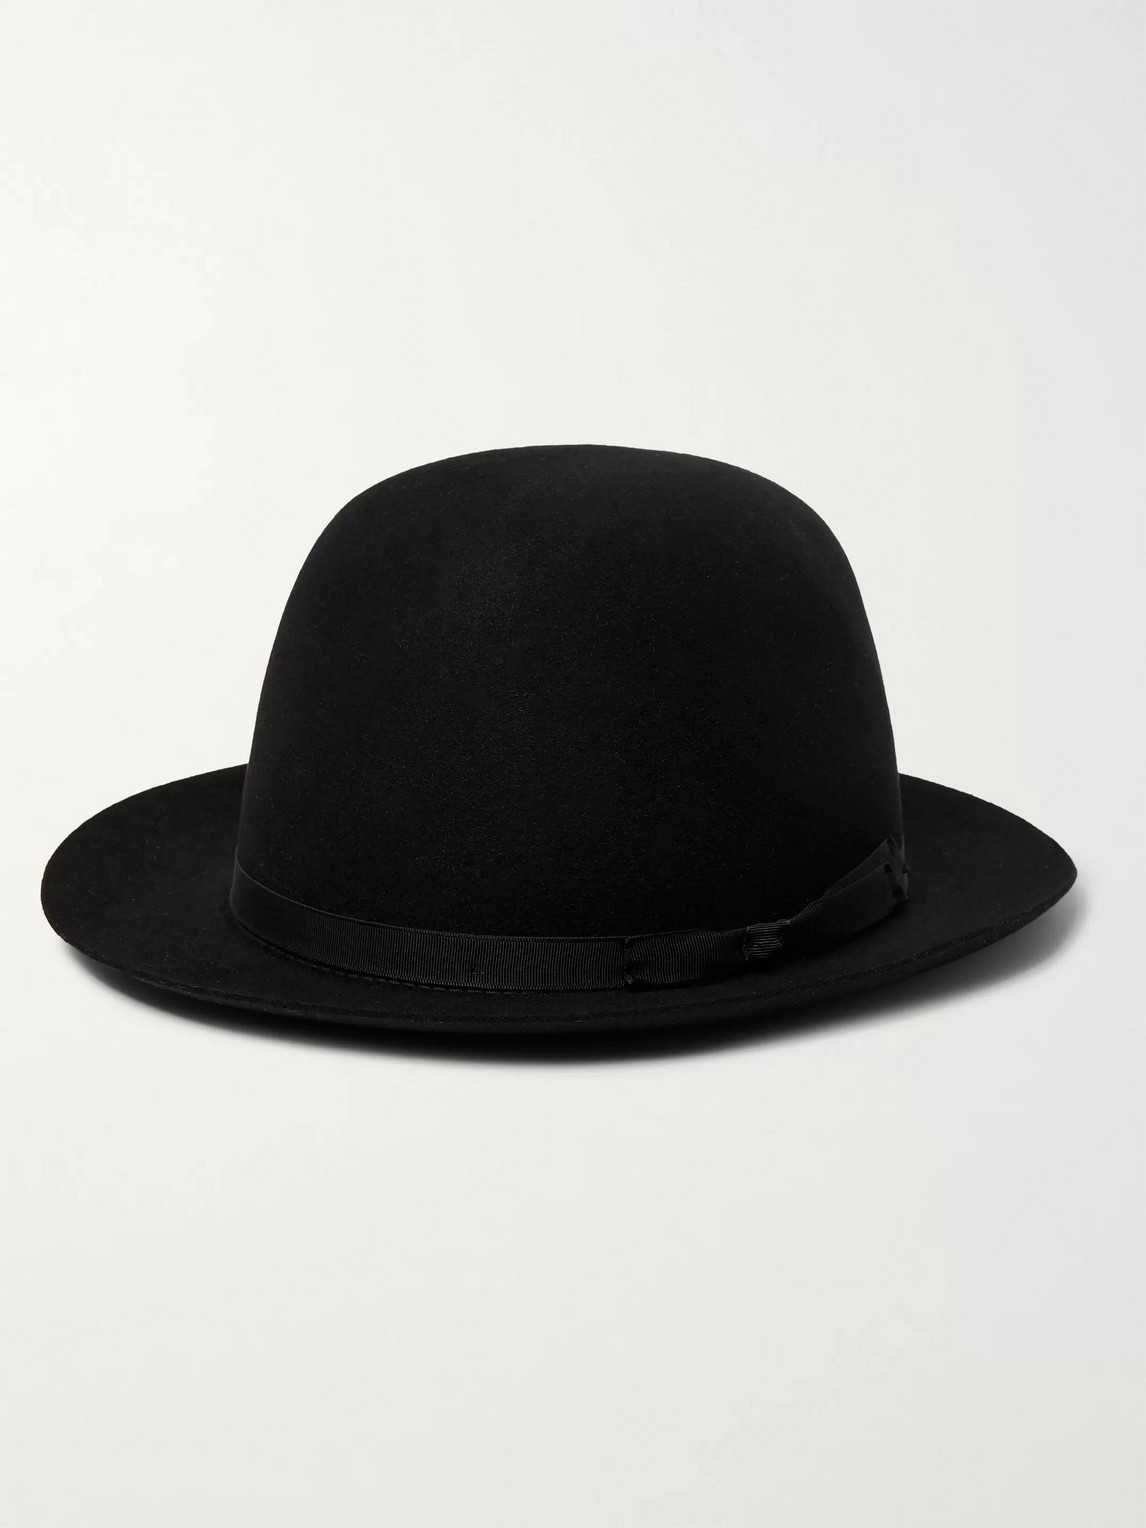 Lock & Co Hatters Voyager Rollable Rabbit-felt Trilby In Black